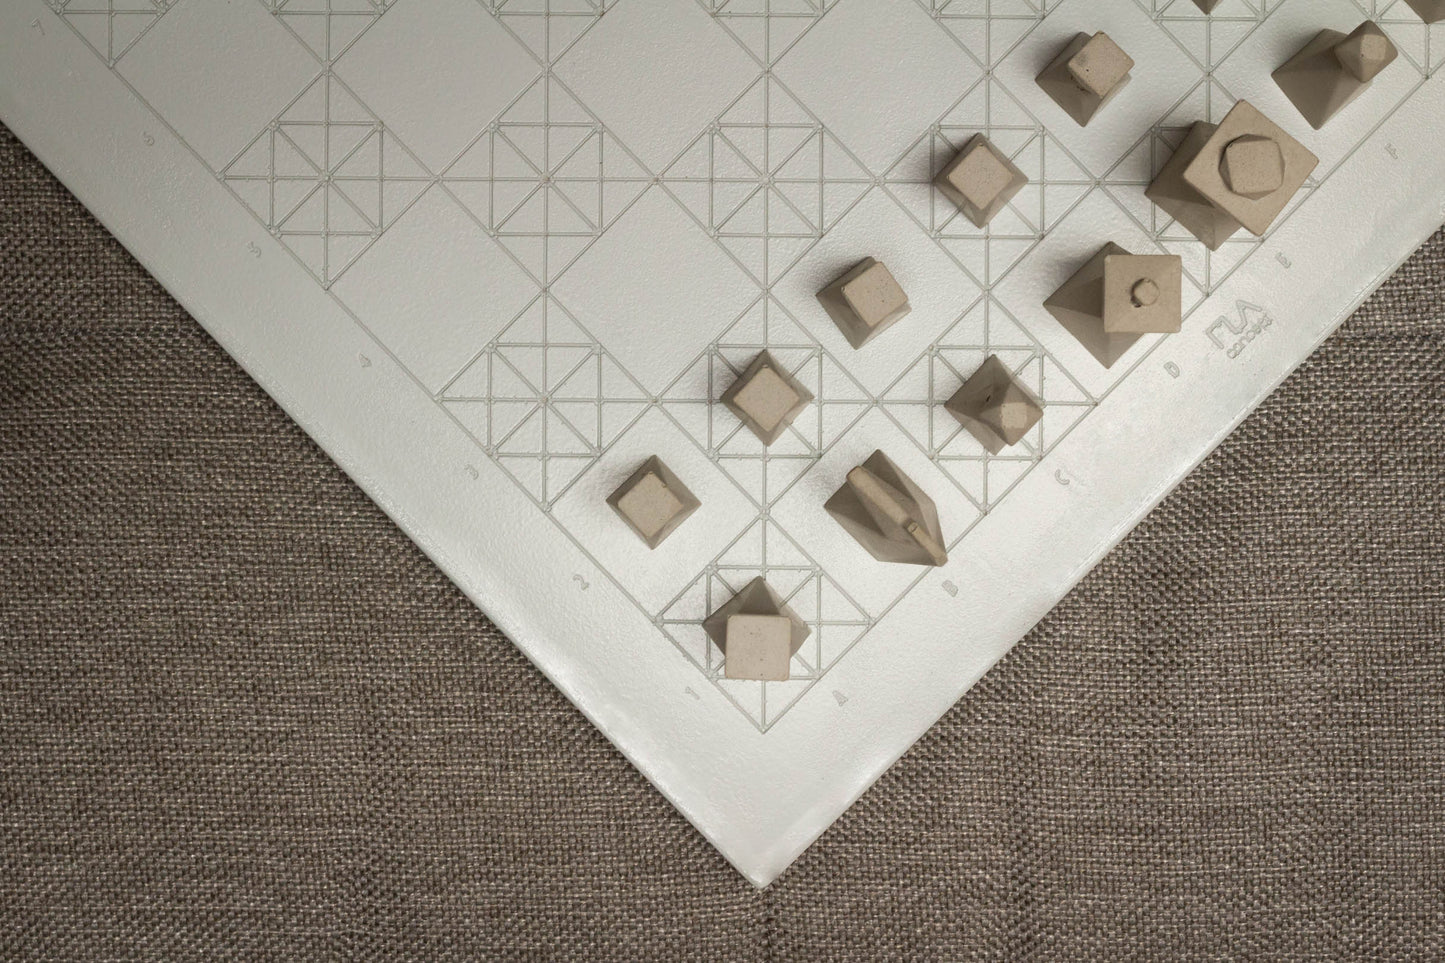 Concrete Handmade Modern Geometric Chess Pieces (No Chessboard) | Home Decor | Luxury Personalized Gift